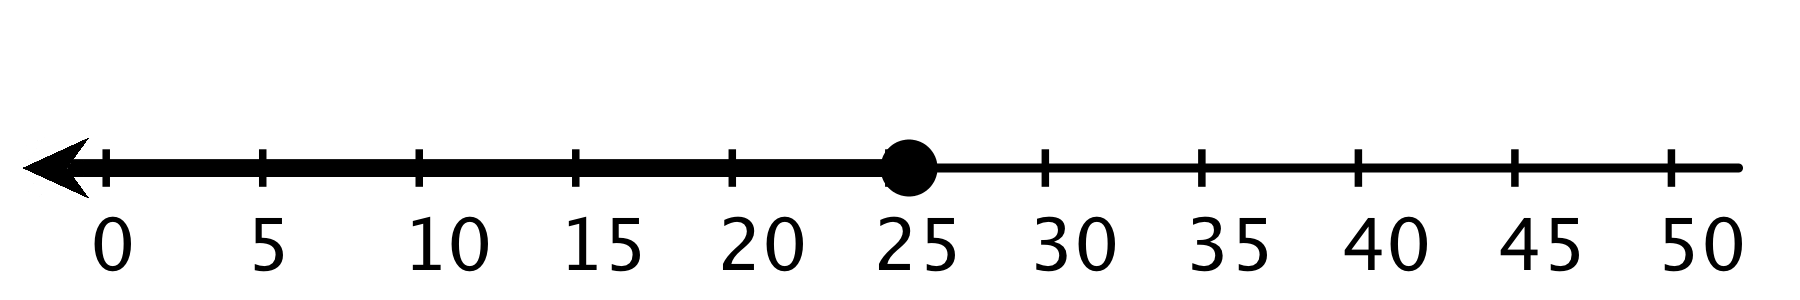 A number line with the numbers 0 through 50, in increments of 5, indicated. A closed circle is indicated at 25 and an arrow is drawn from the closed circle extending to the left.